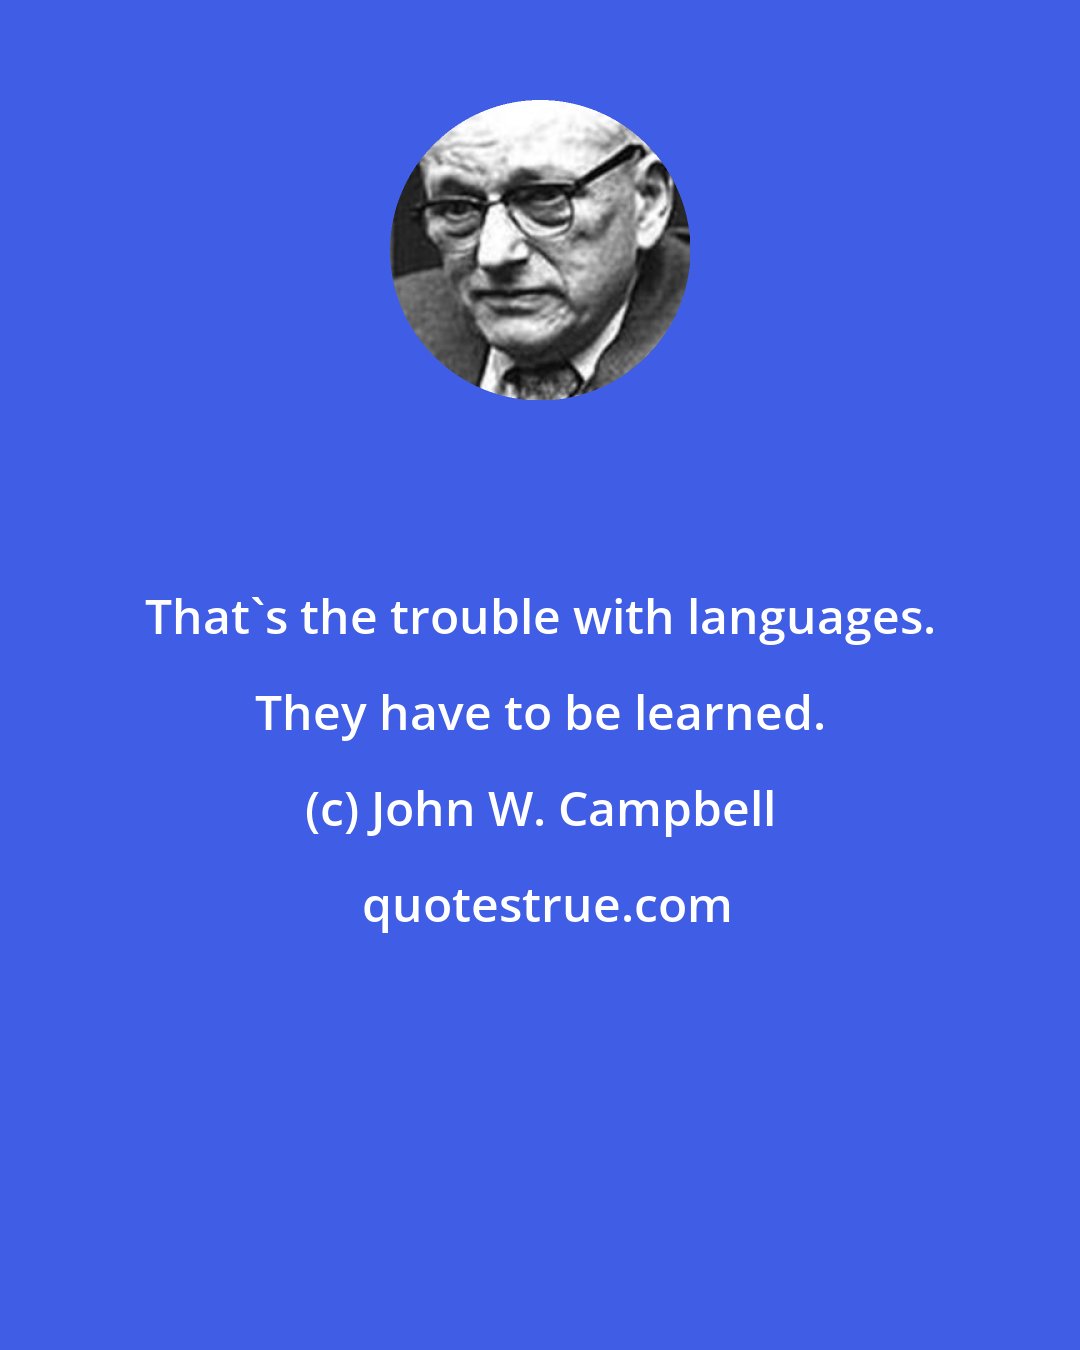 John W. Campbell: That's the trouble with languages. They have to be learned.